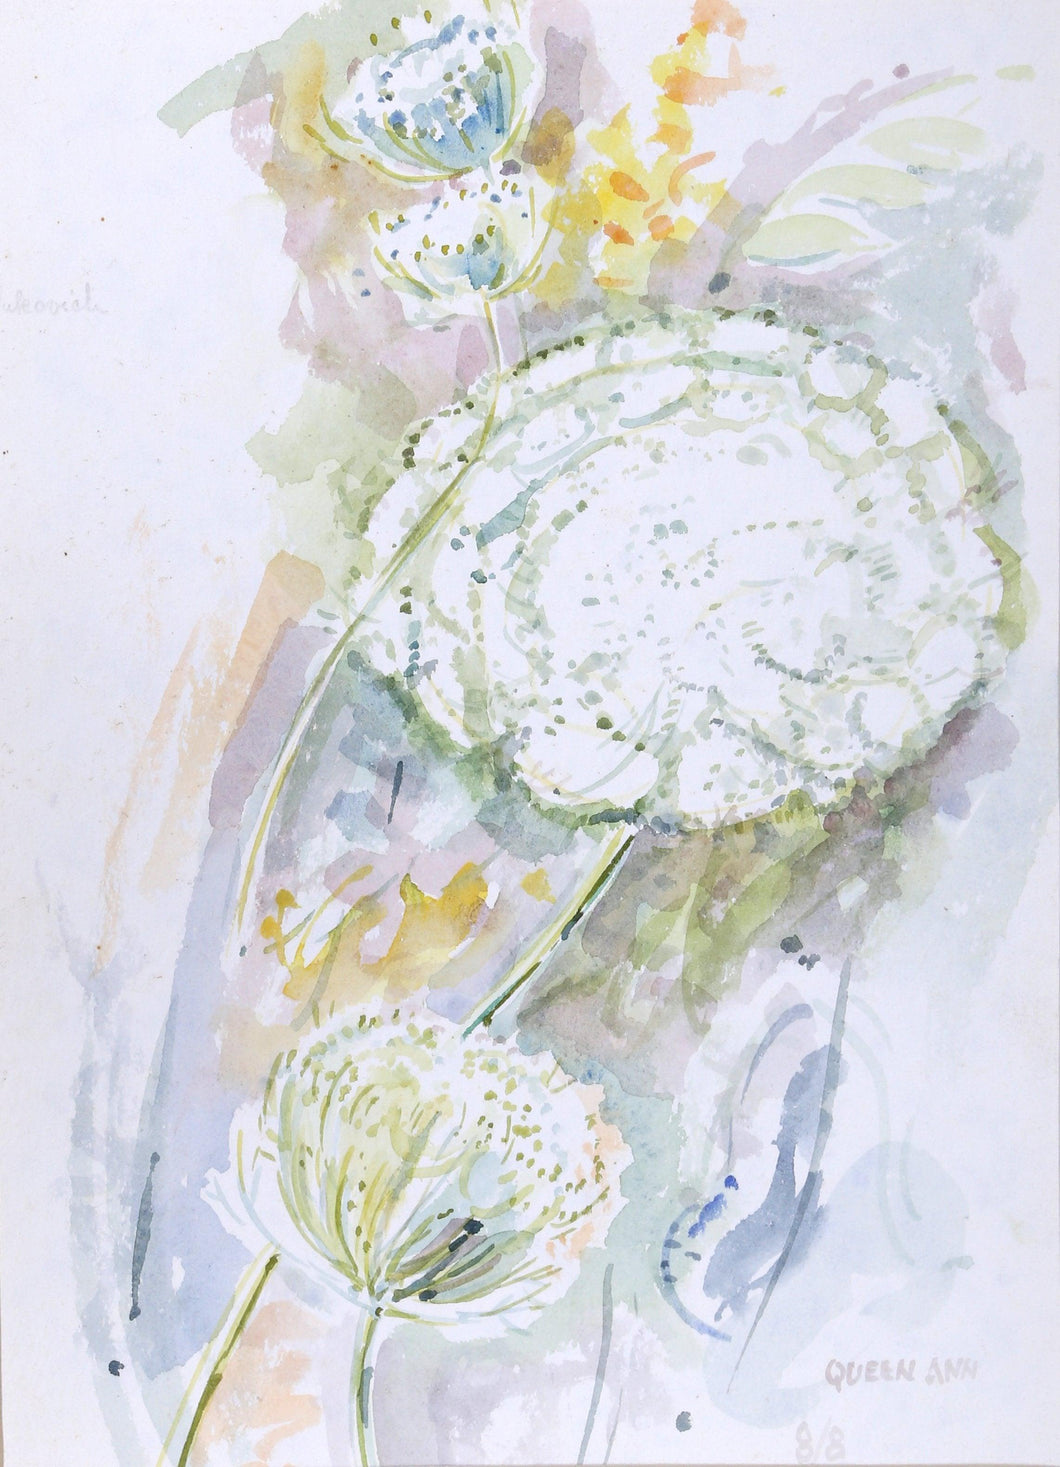 Queen Ann's Lace Watercolor | Charles Blaze Vukovich,{{product.type}}